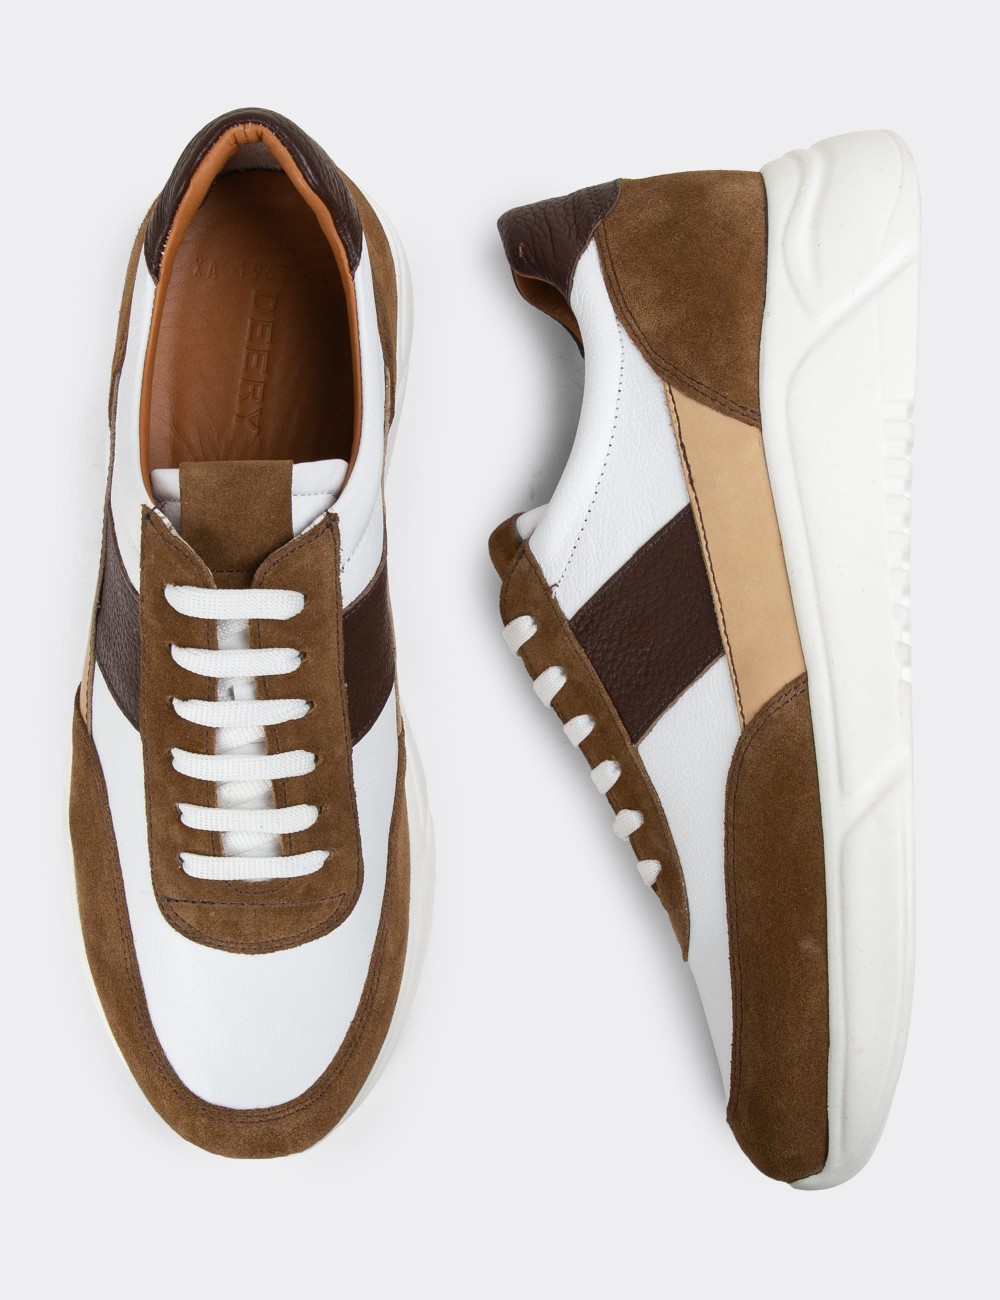 Tan Suede Leather Sneakers - 01963MTBAE01